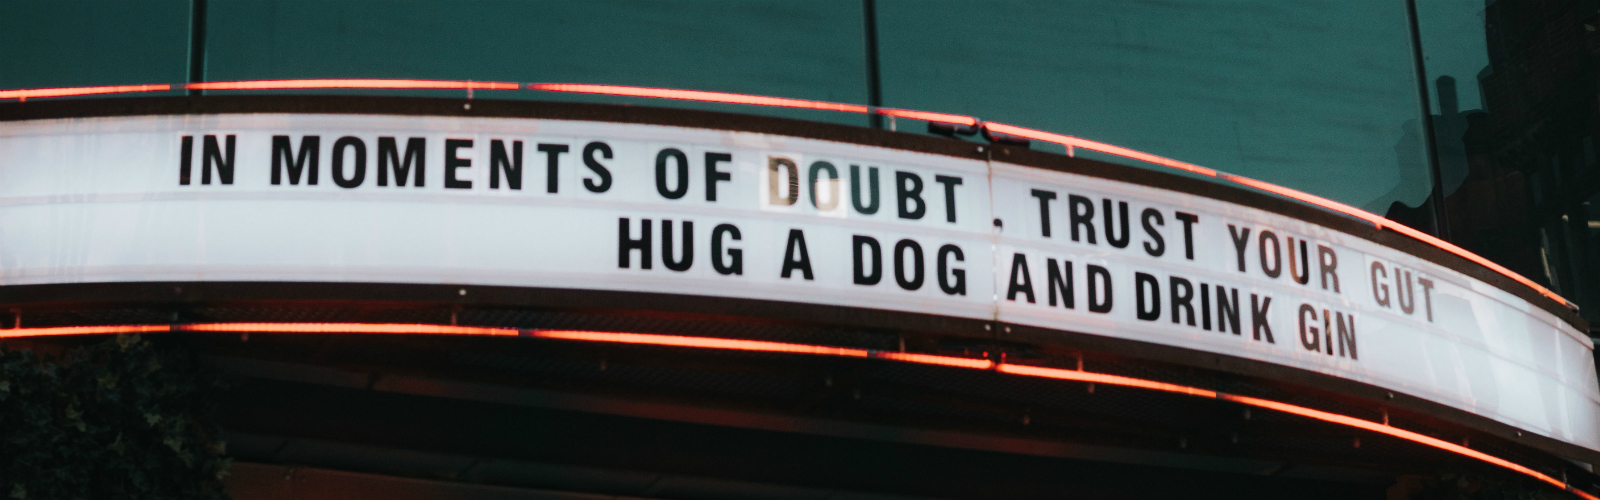 Old fashioned theatre sign reading: In moments of doubt, trust your gut, hug a dog and drink gin